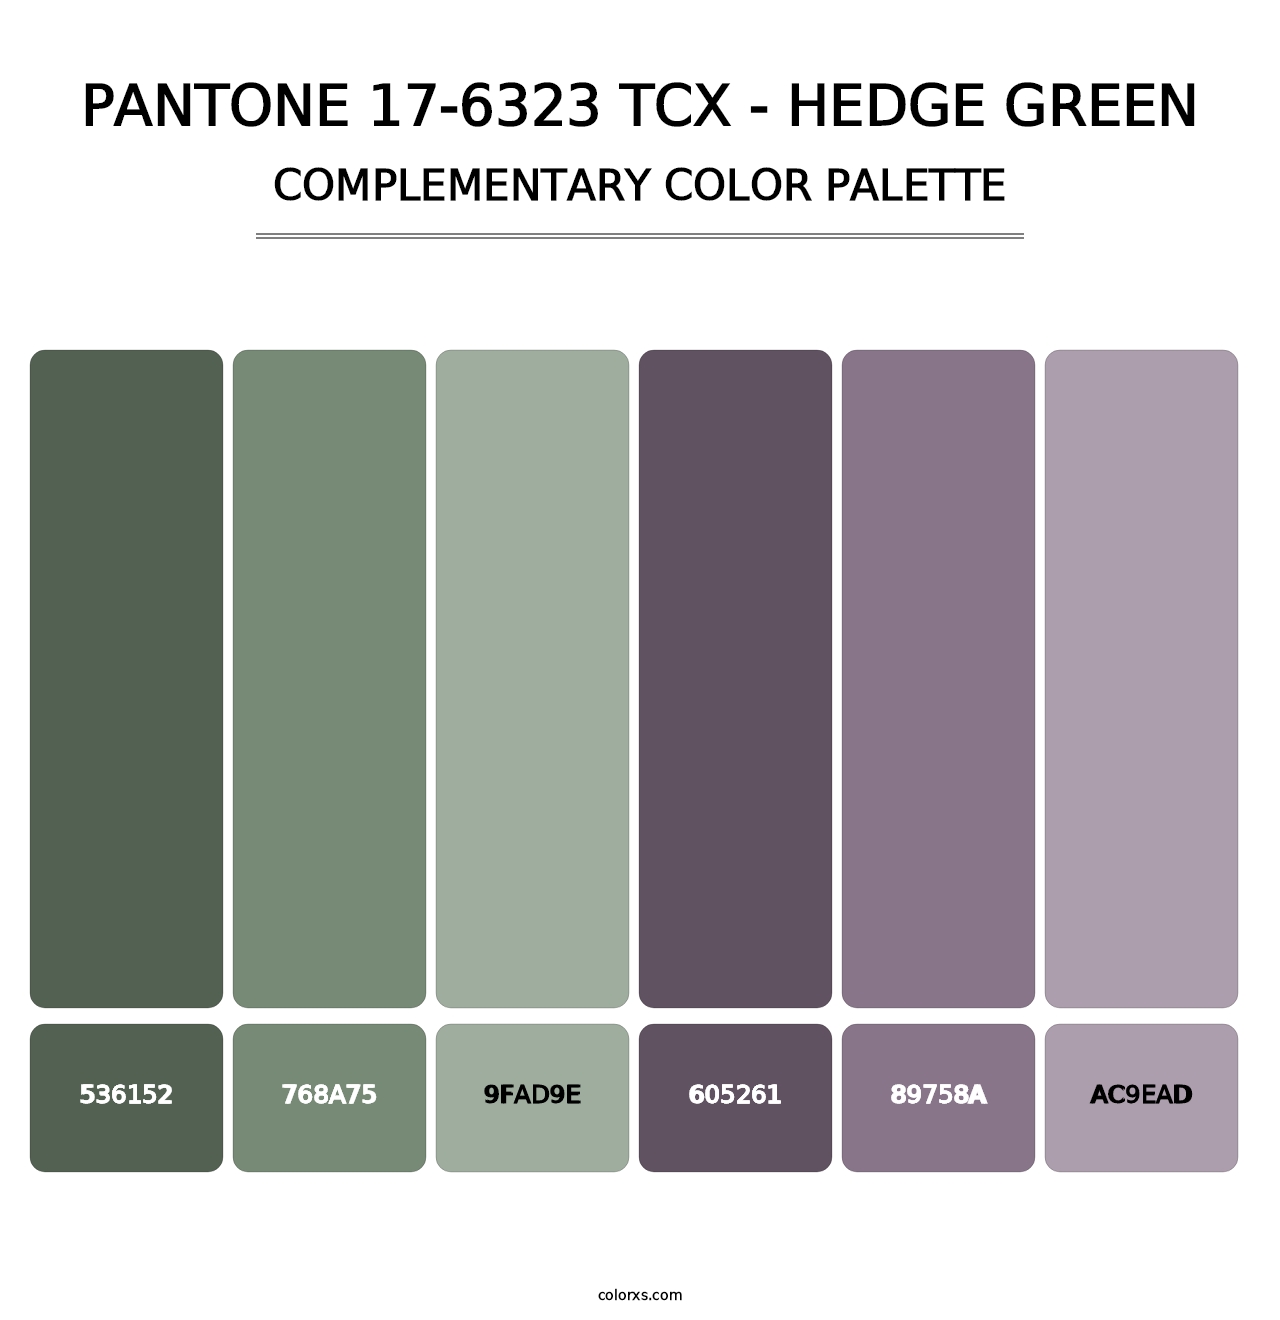 PANTONE 17-6323 TCX - Hedge Green - Complementary Color Palette